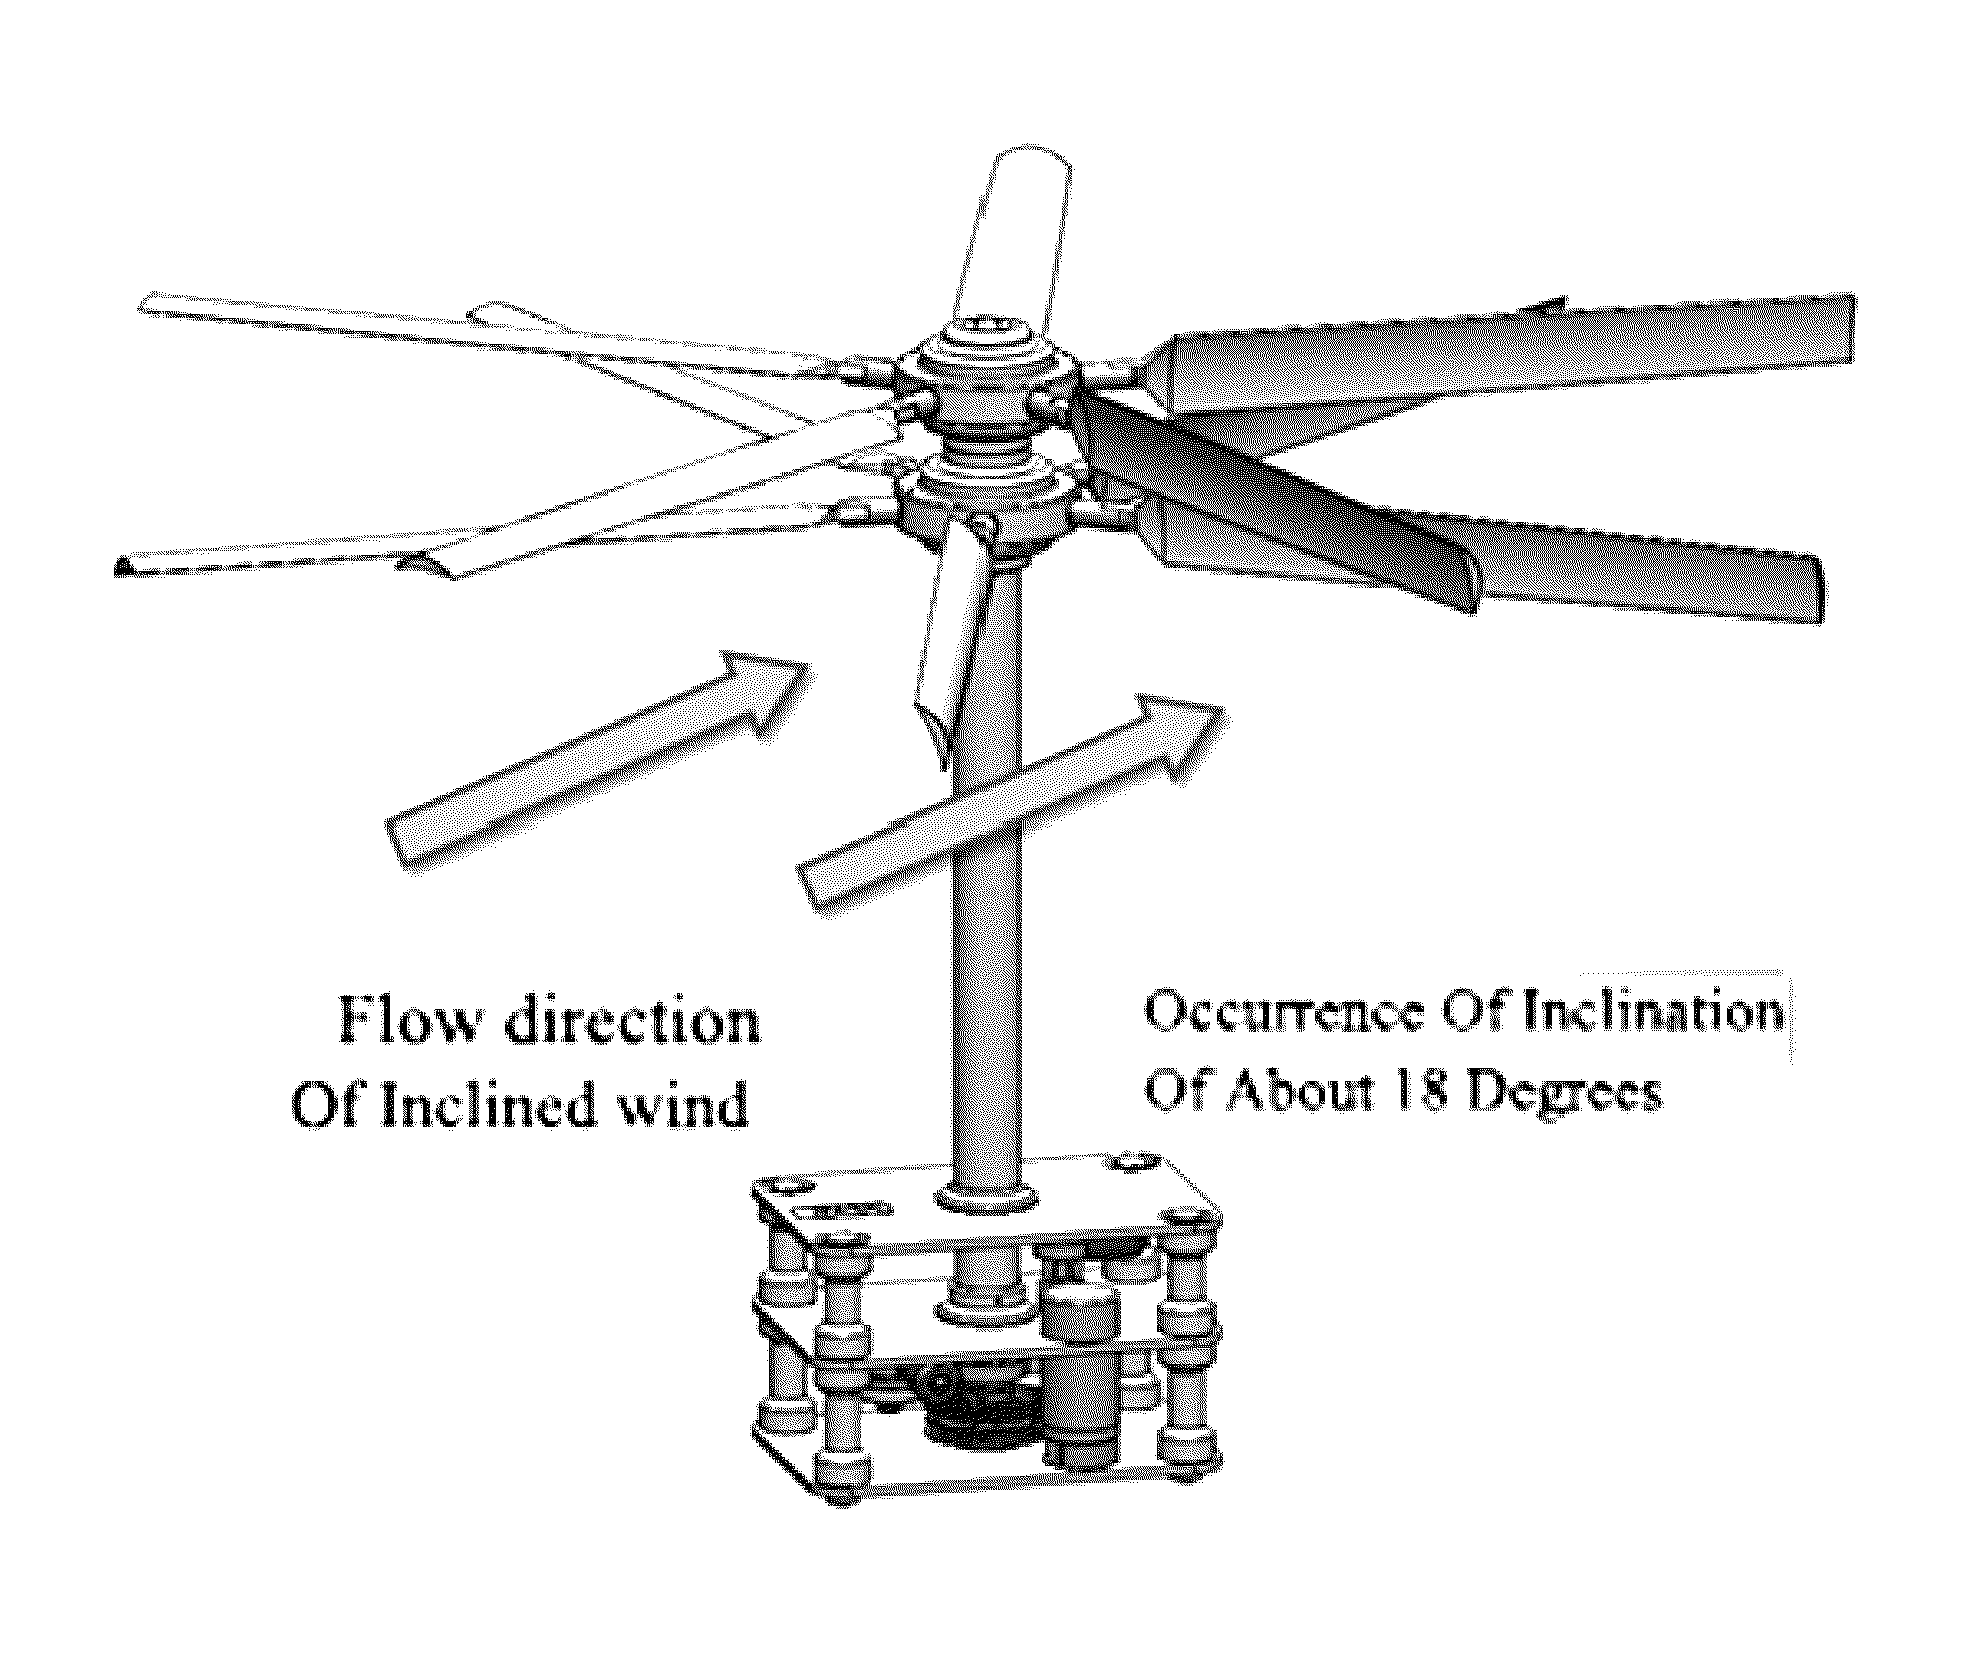 High-performance wind turbine generator that can be driven in horizontal/vertical axis directions with the use of 3D active intelligent turbine blades